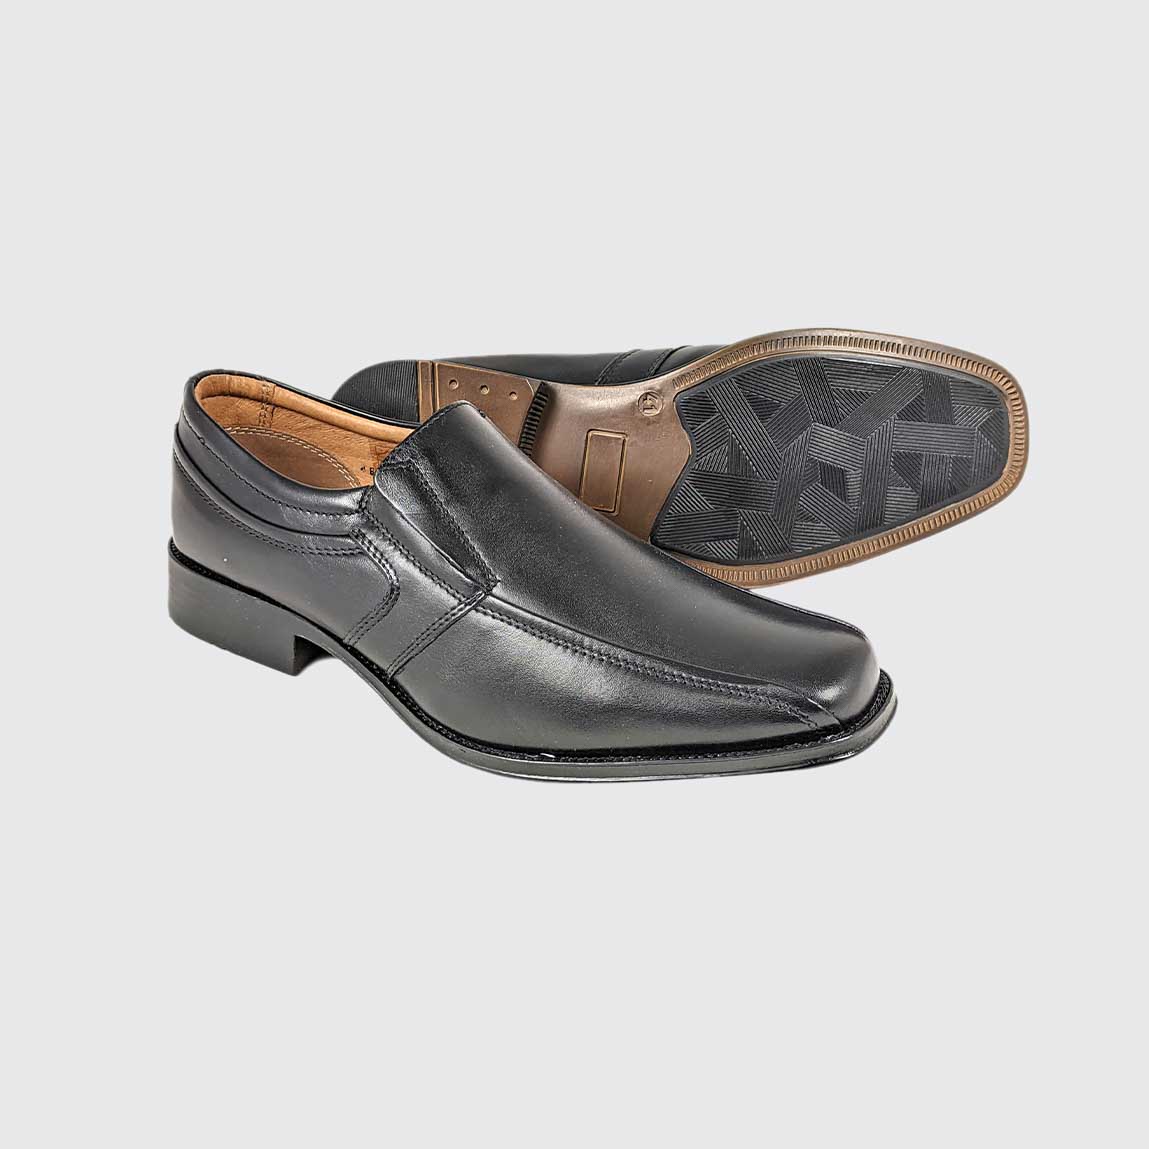 Image highlighting the sole of the Dubarry Declan Black shoe.